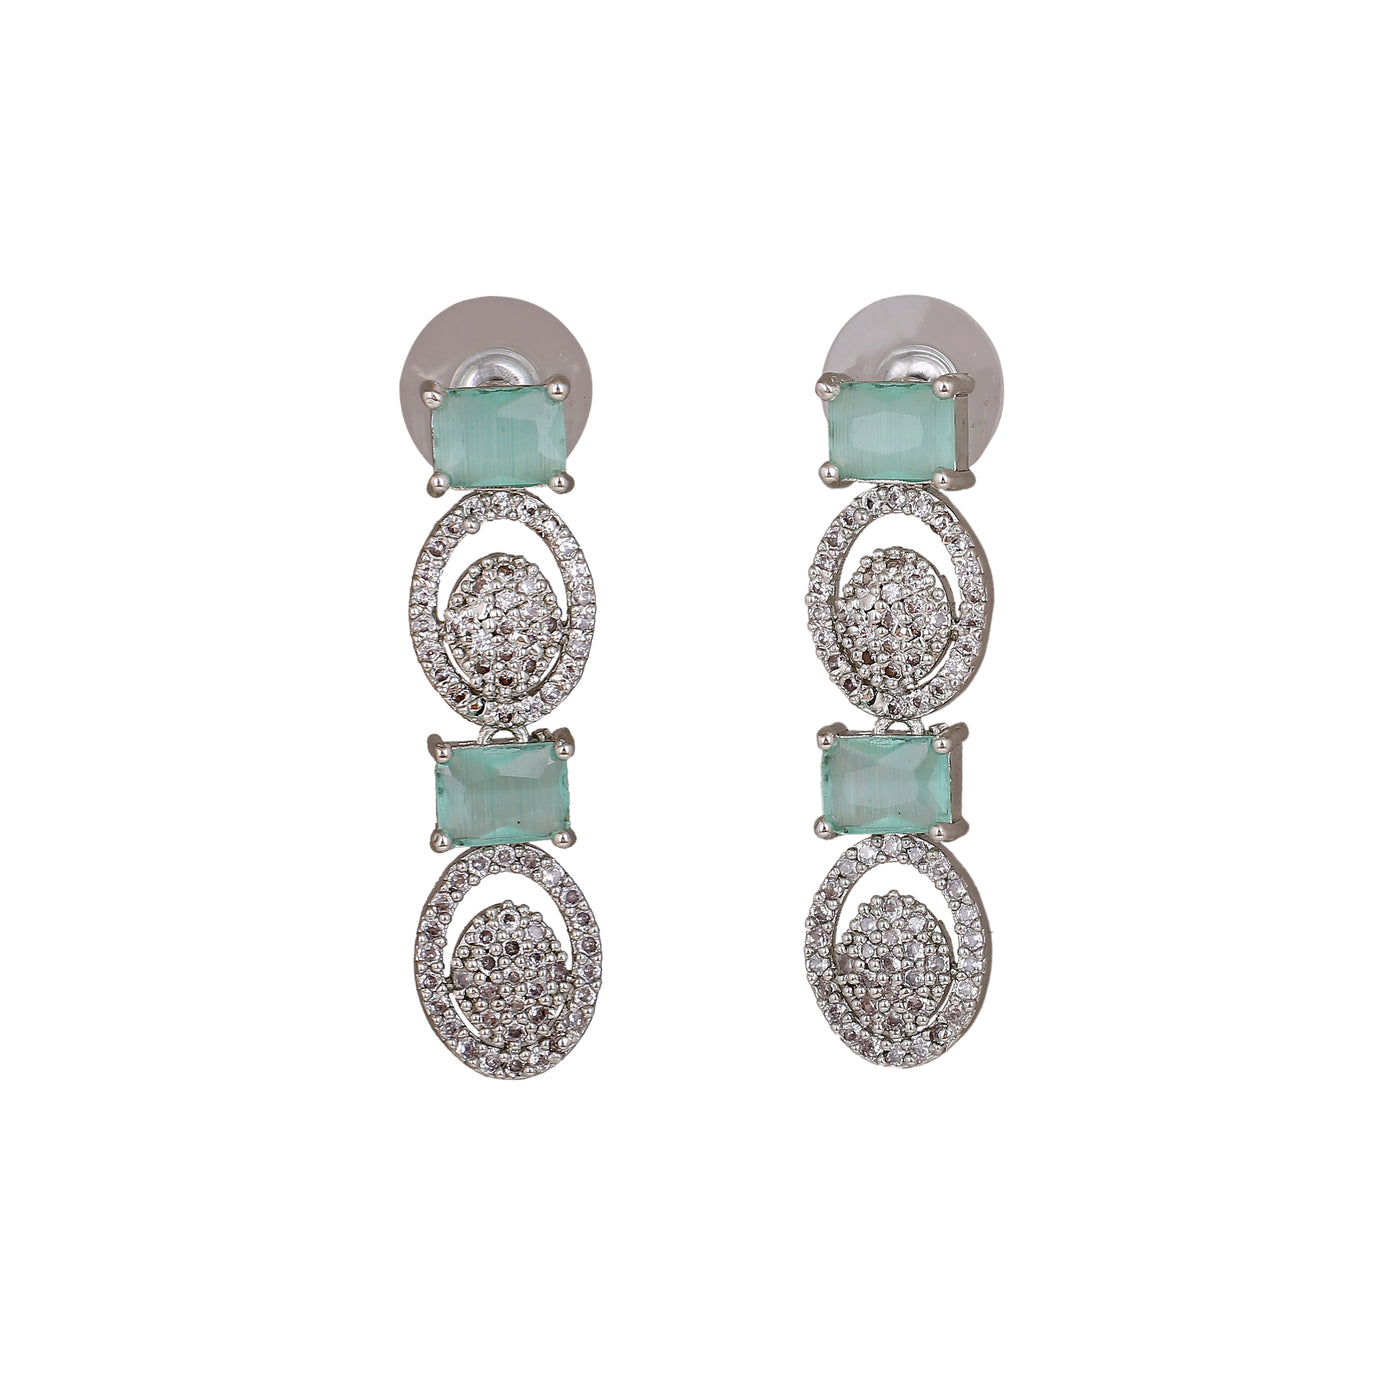 Estele Rhodium Plated CZ Amore Designer Earrings with Mint Green Crystals for Women